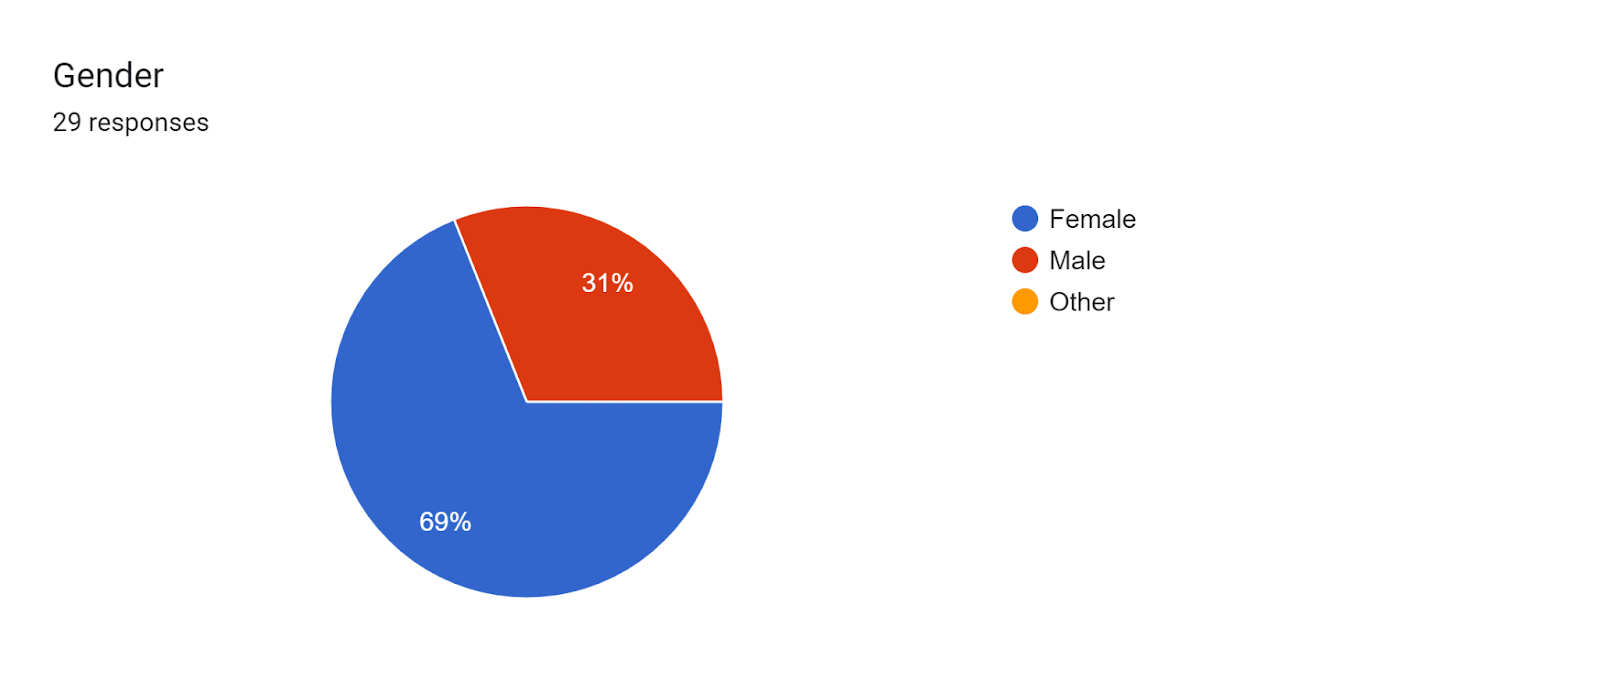 Forms response chart. Question title: Gender. Number of responses: 29 responses.